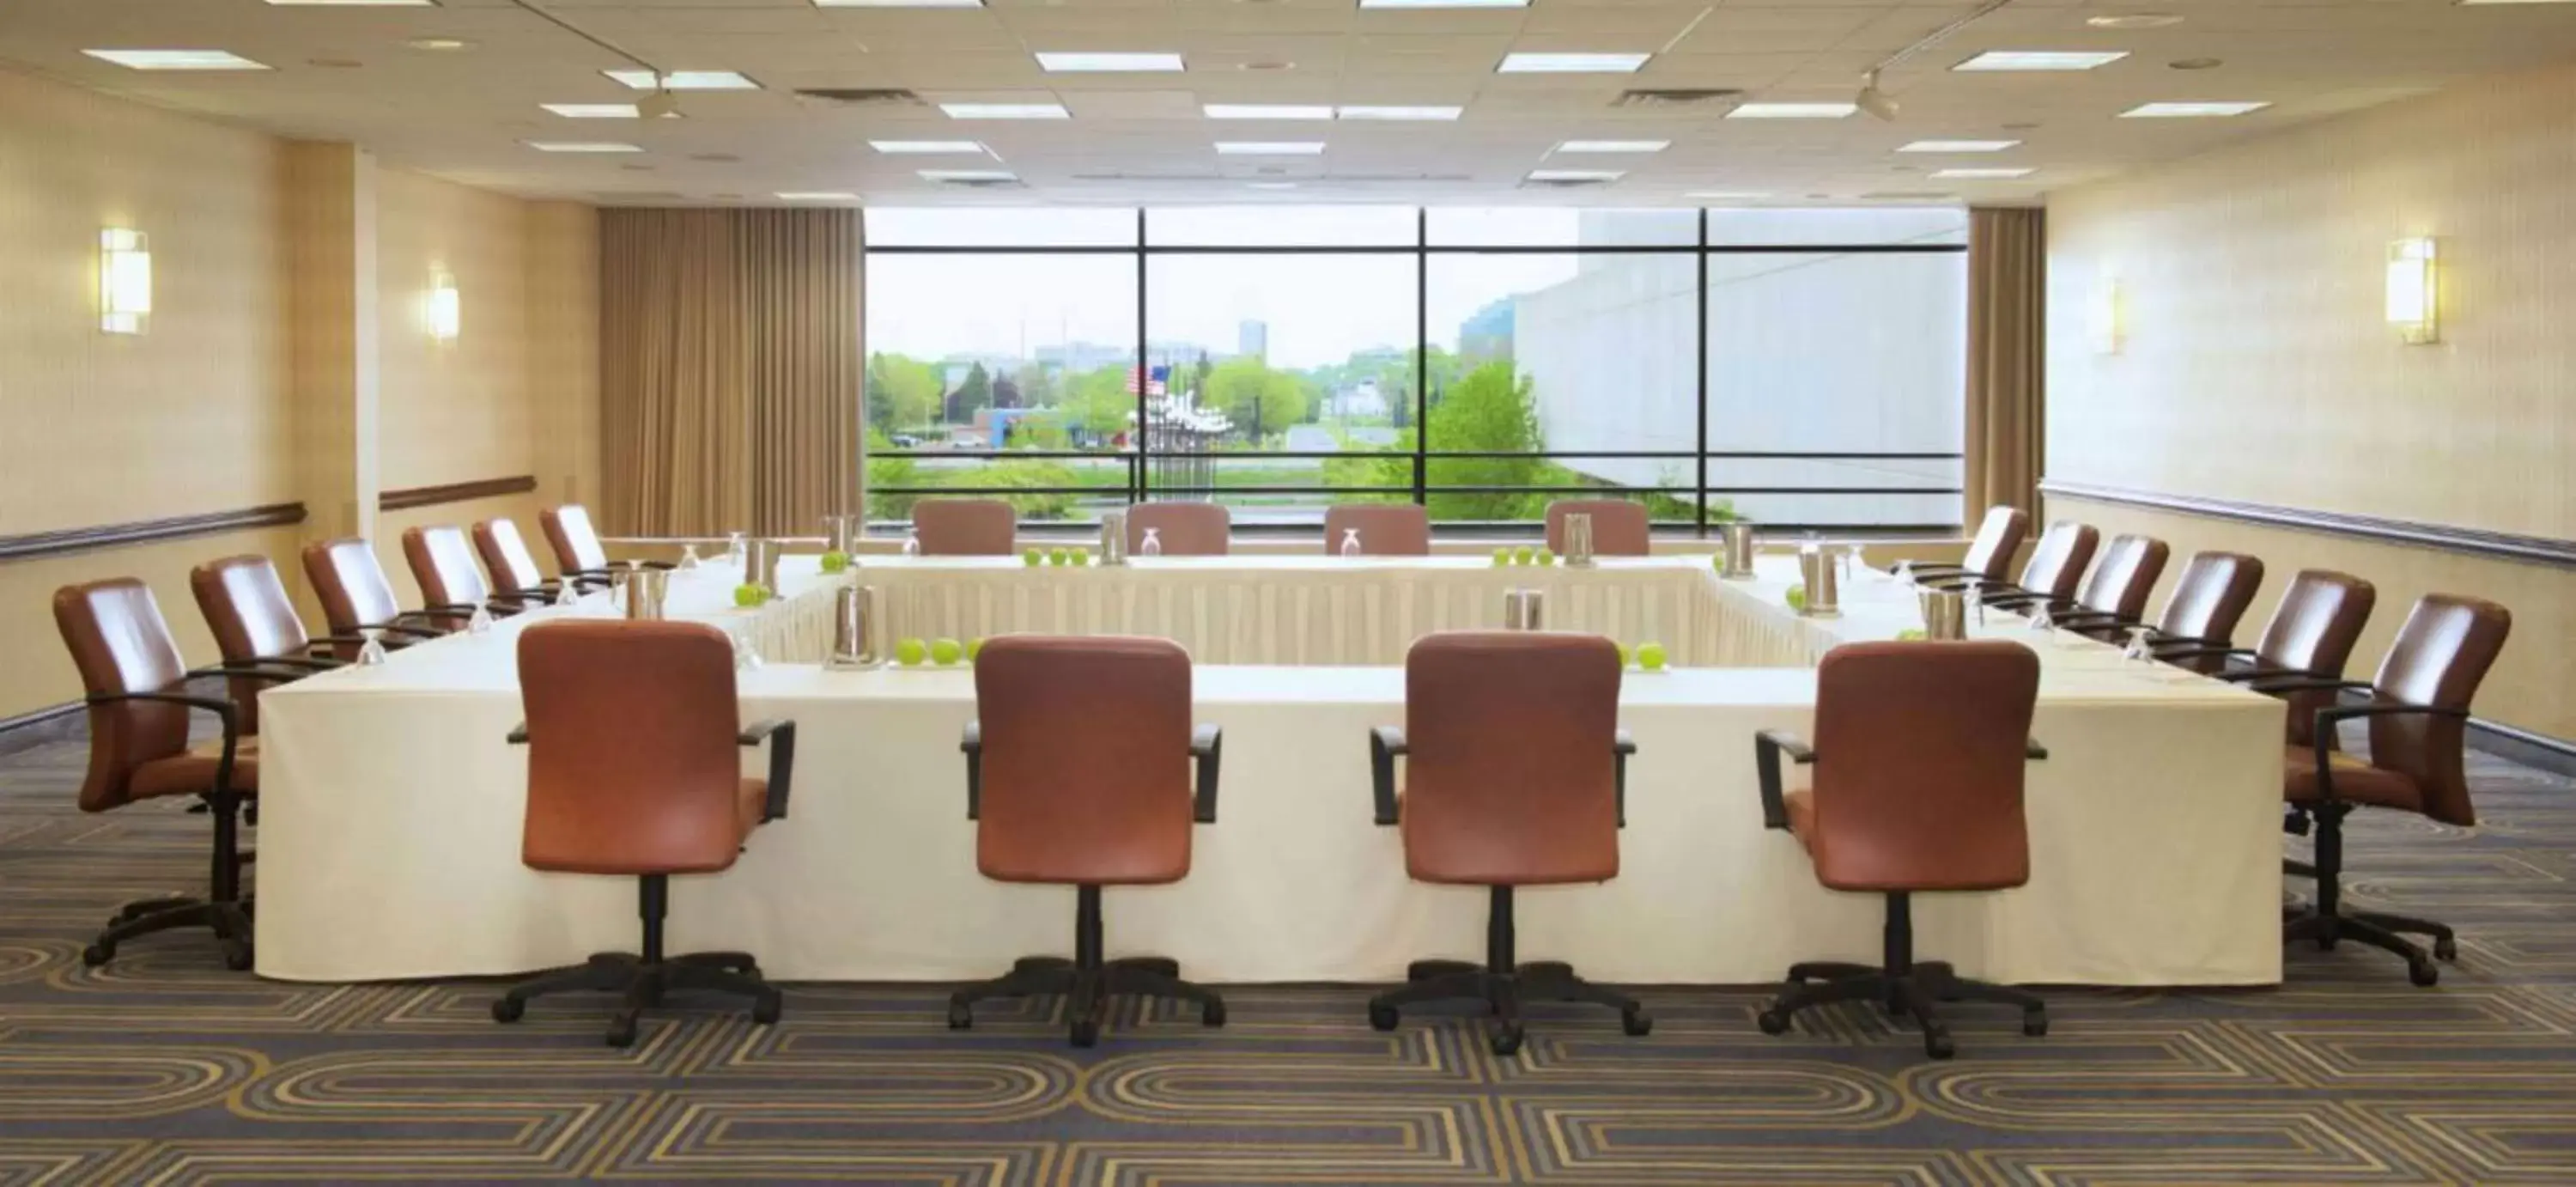 Meeting/conference room in DoubleTree by Hilton Bloomington Minneapolis South